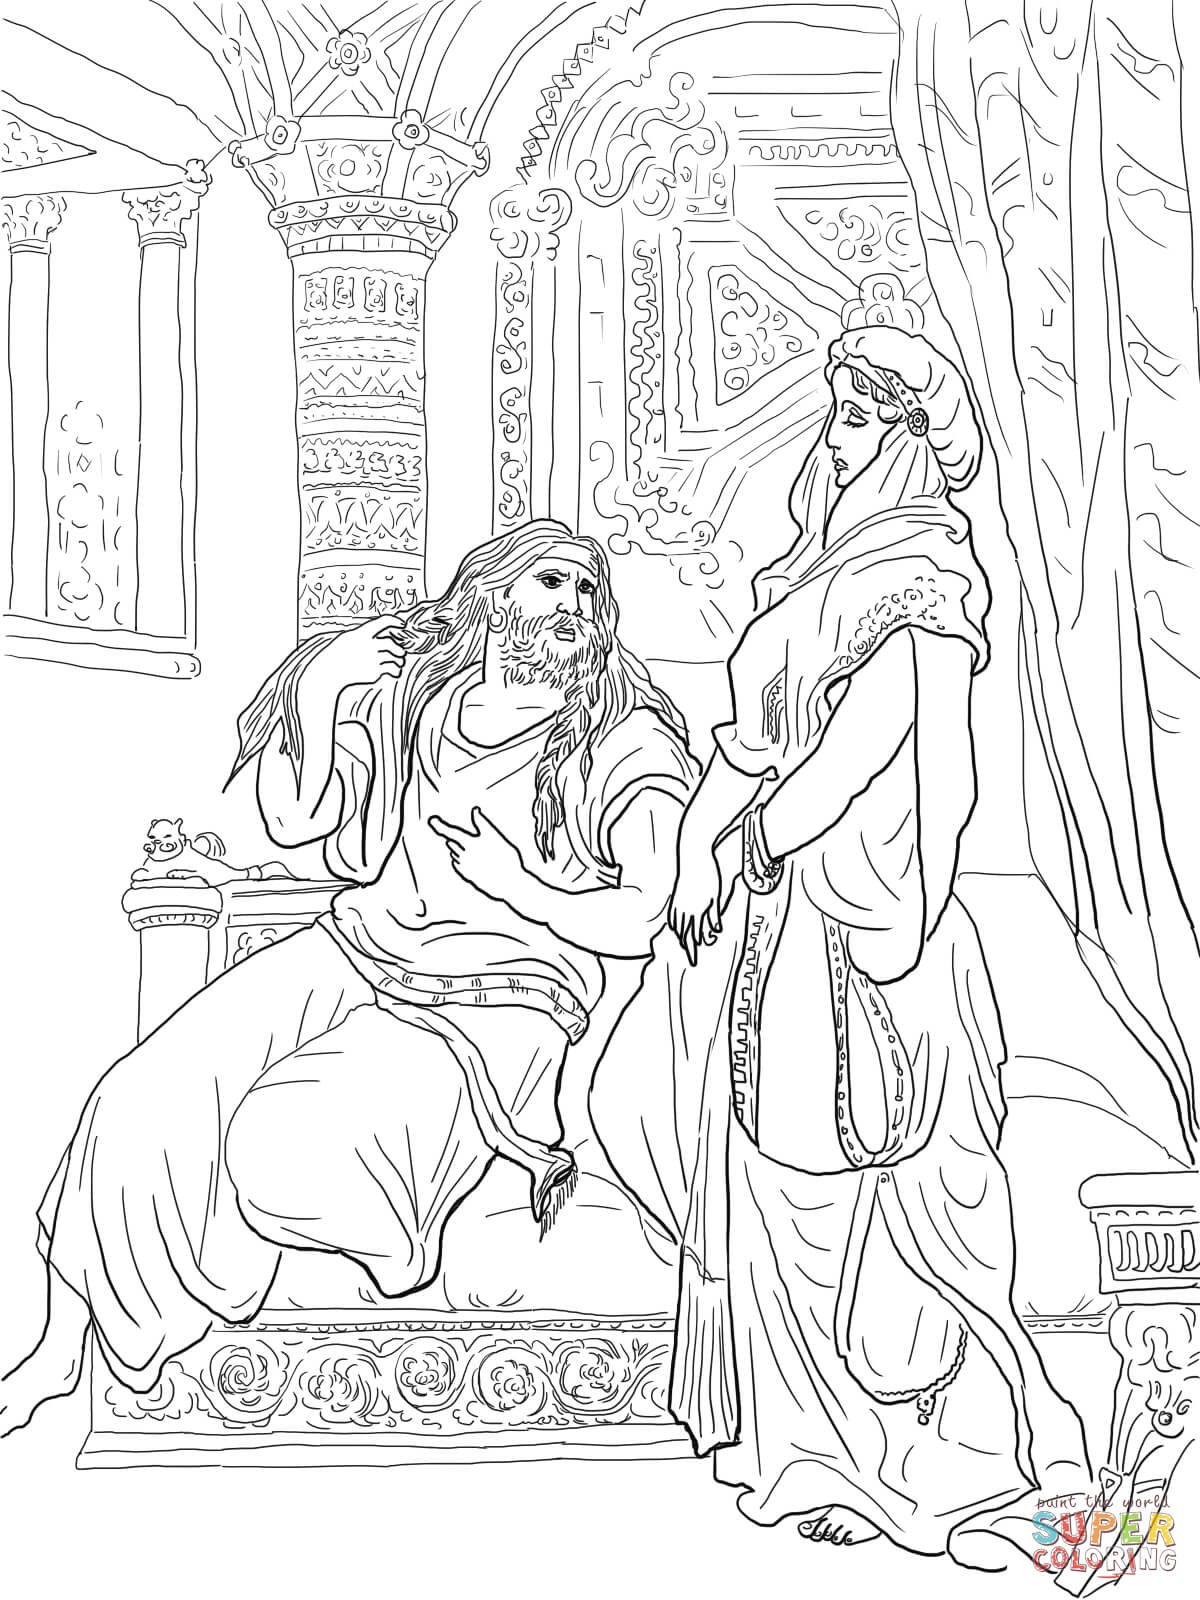 Coloring Pages Of Samson - Coloring Home